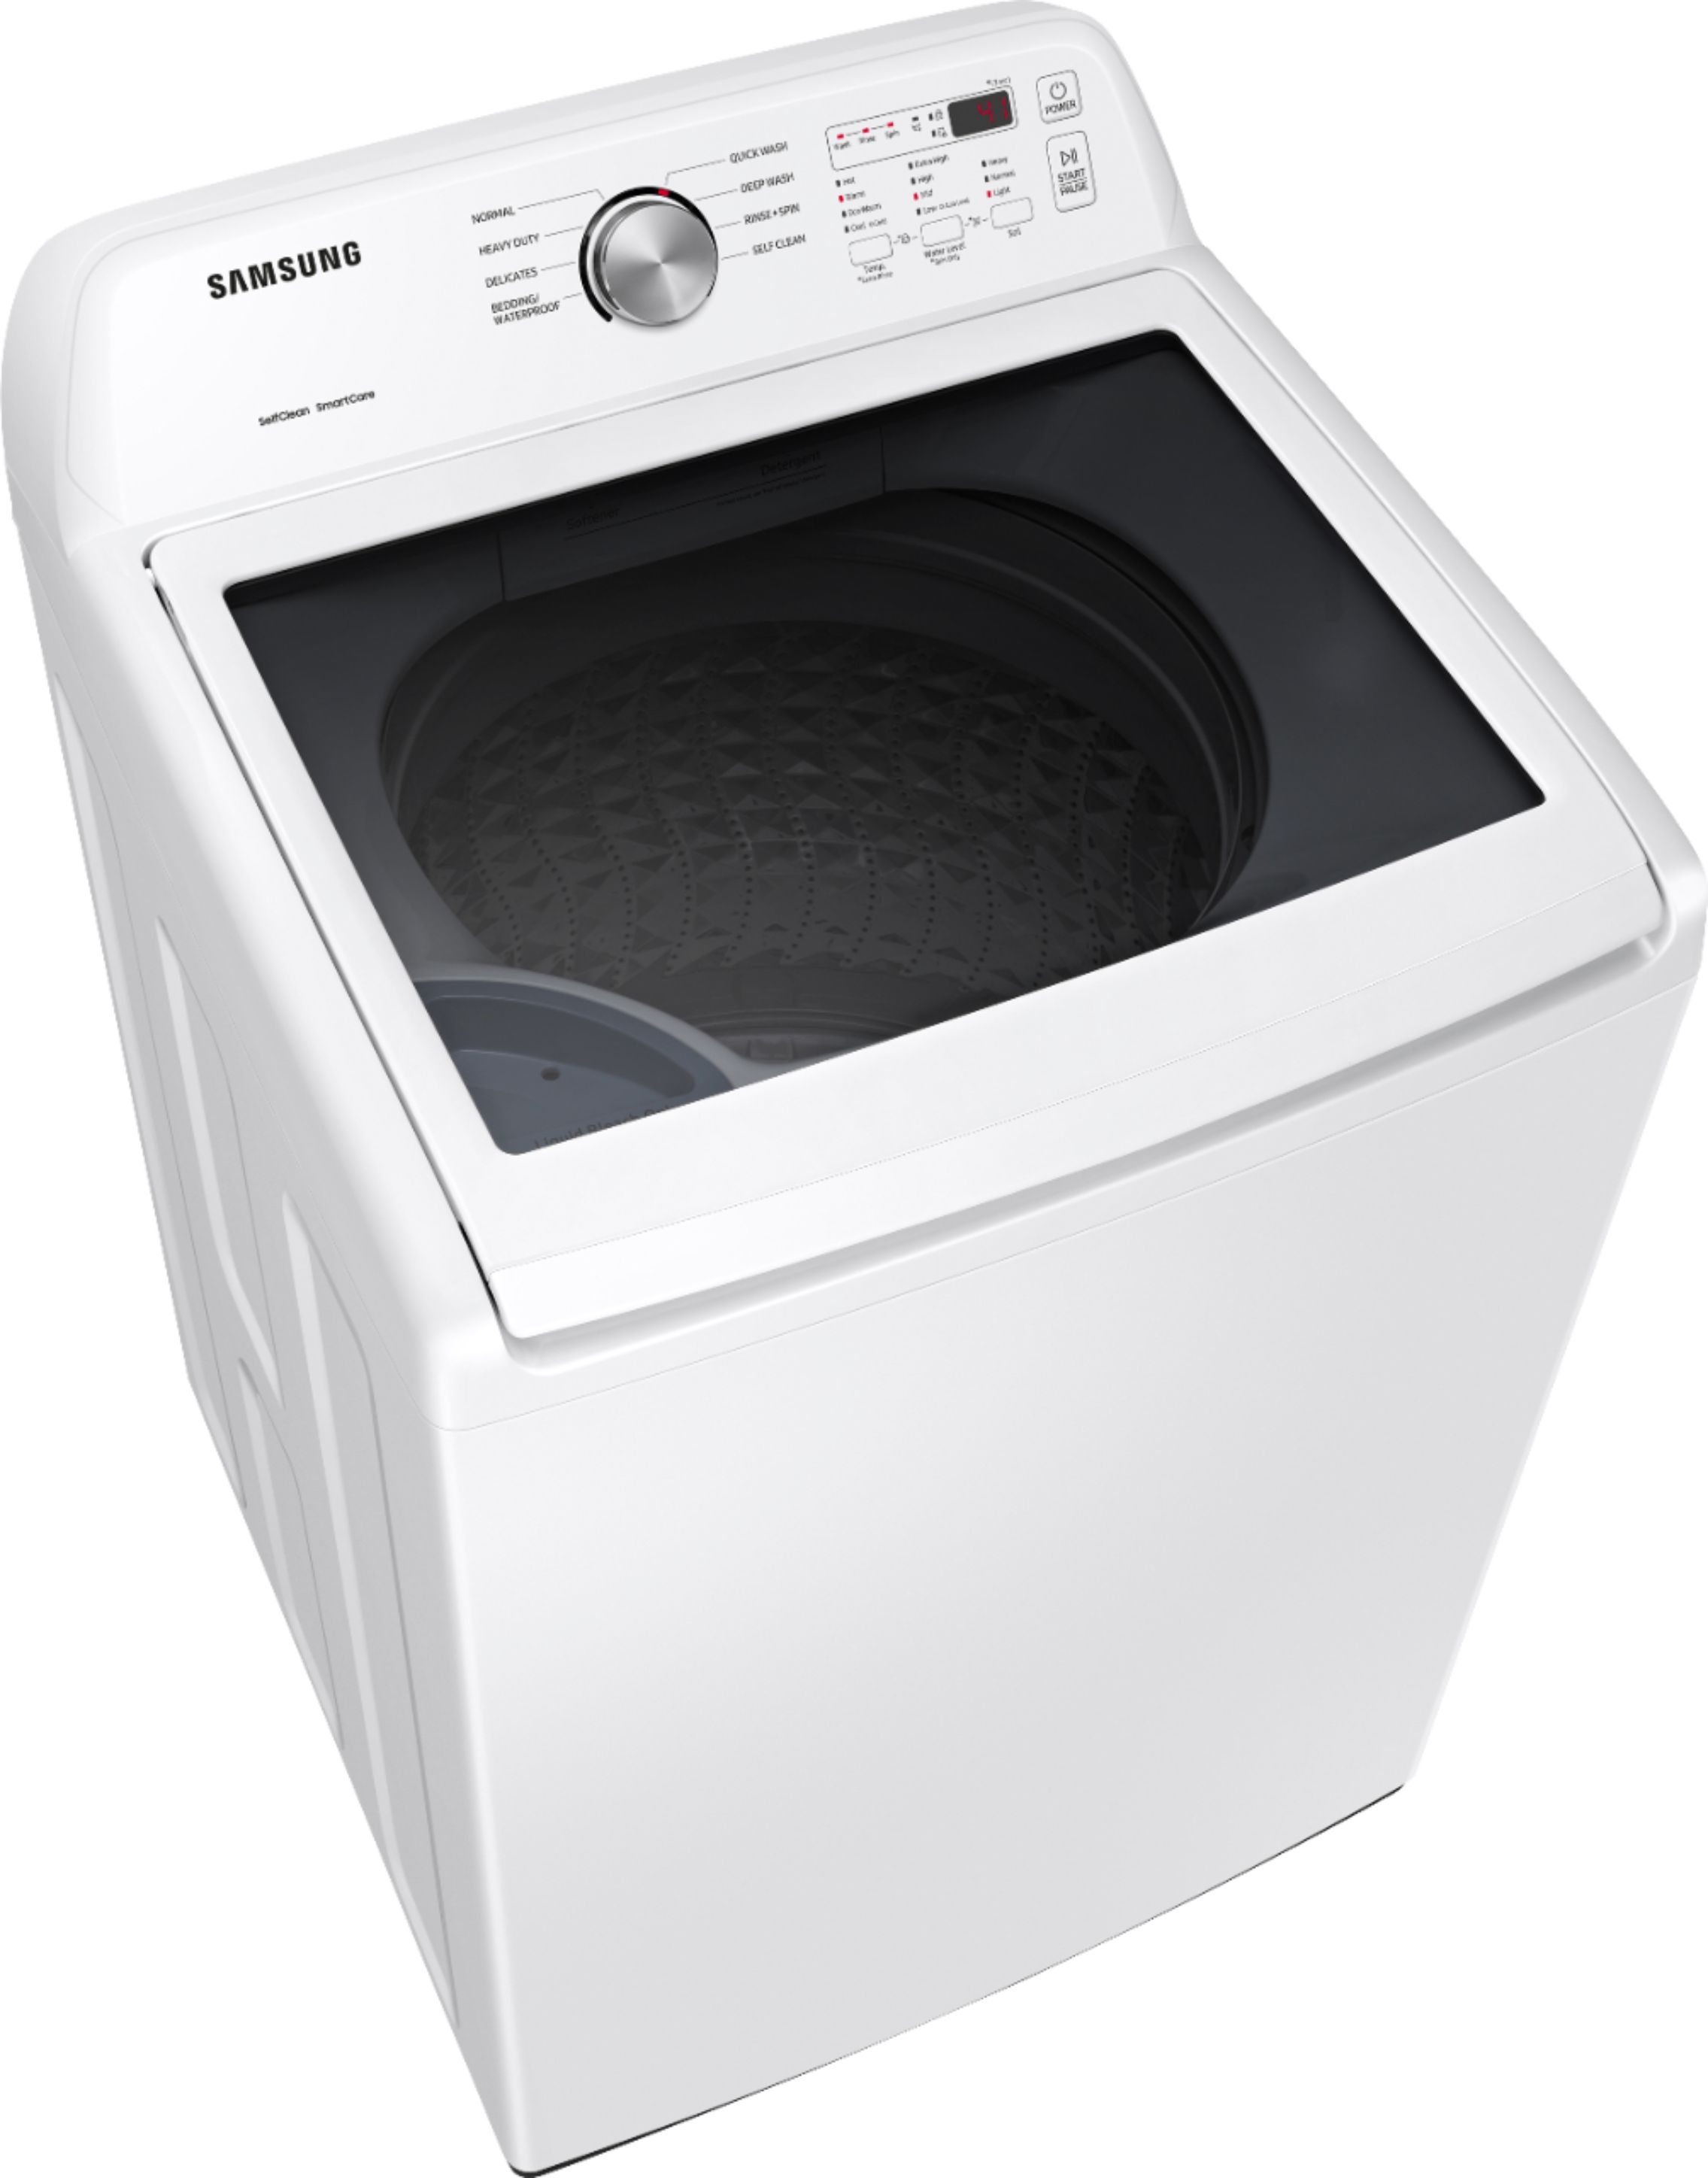 Angle View: Samsung - 4.5 Cu. Ft. High Efficiency Top Load Washer with Active WaterJet - Brushed Black